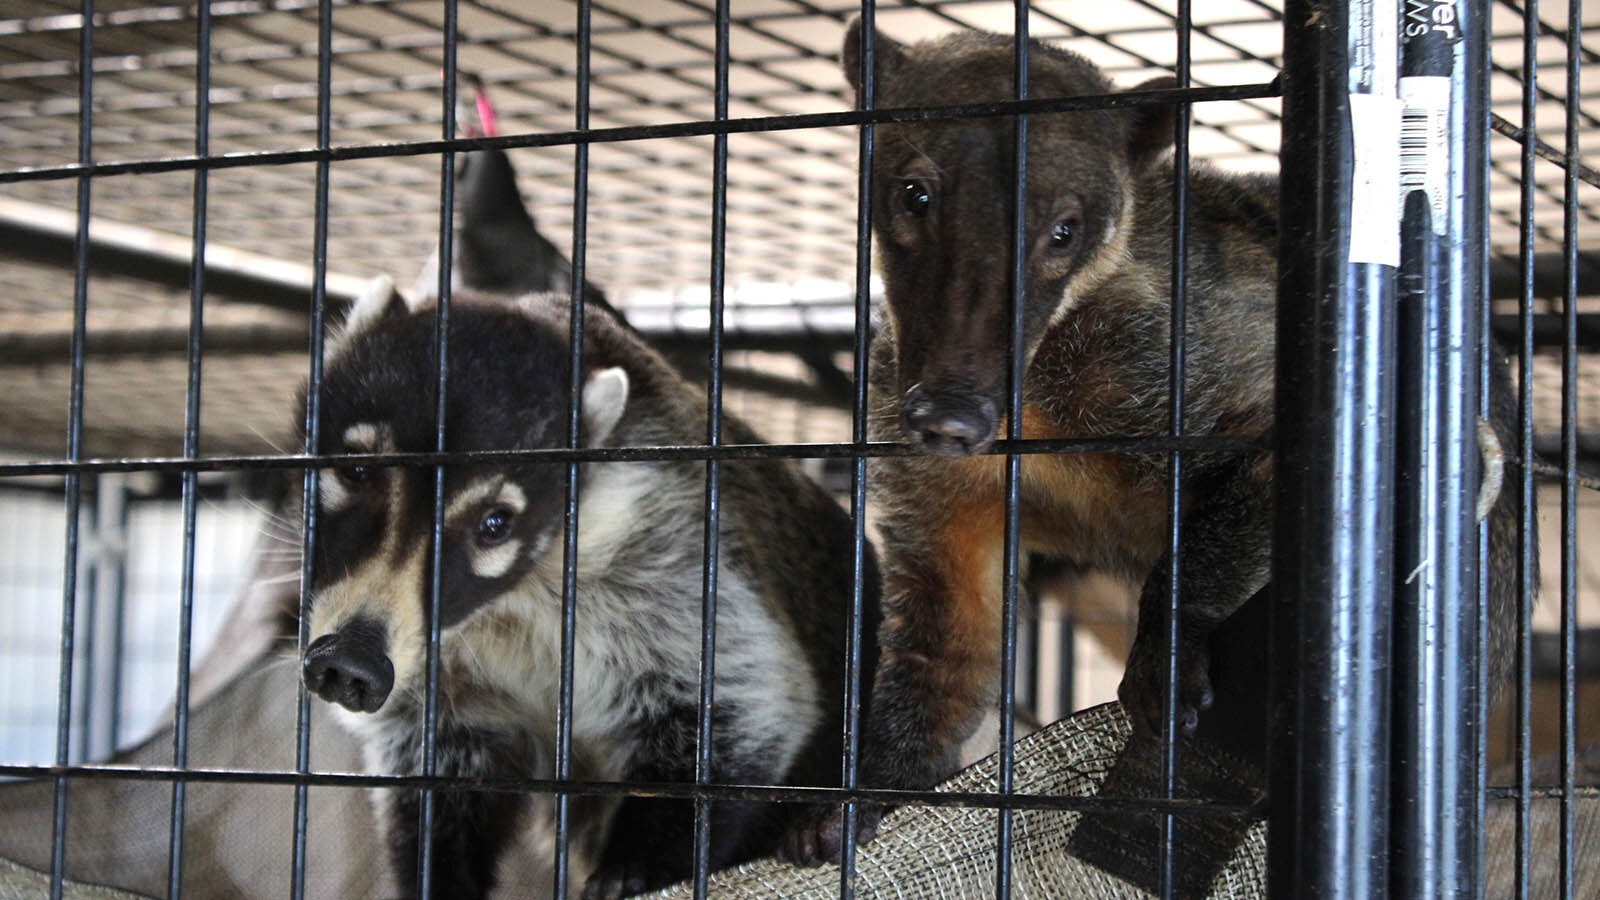 Coatimundi, members of the raccoon family native to South America, greet a visitor at the Broken Bandit Wildlife Center east of Cheyenne.